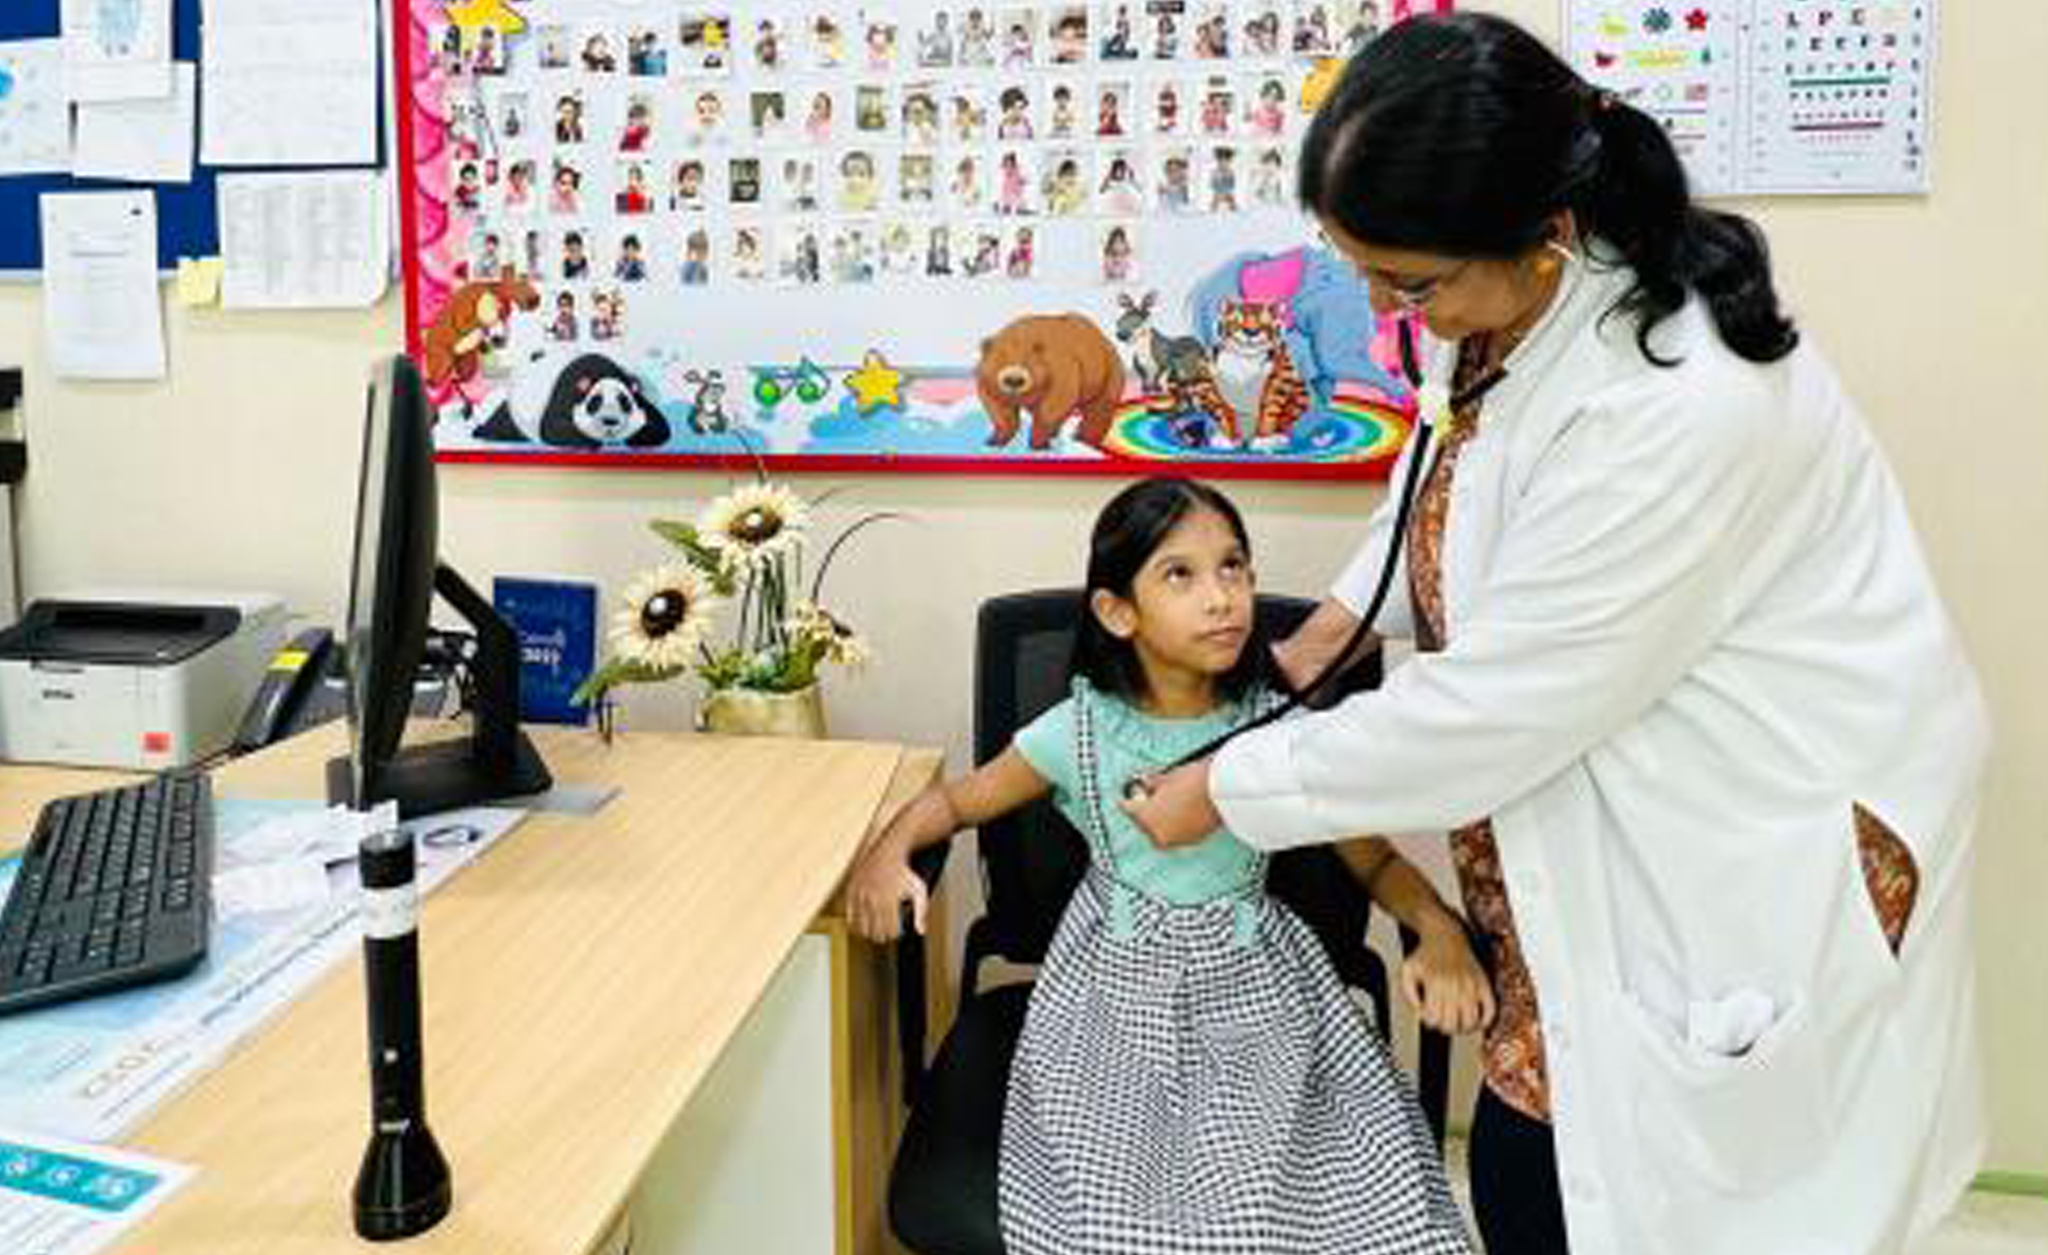 Flu cases on the rise in UAE: Doctors advise parents to get kids vaccinated as schools reopen